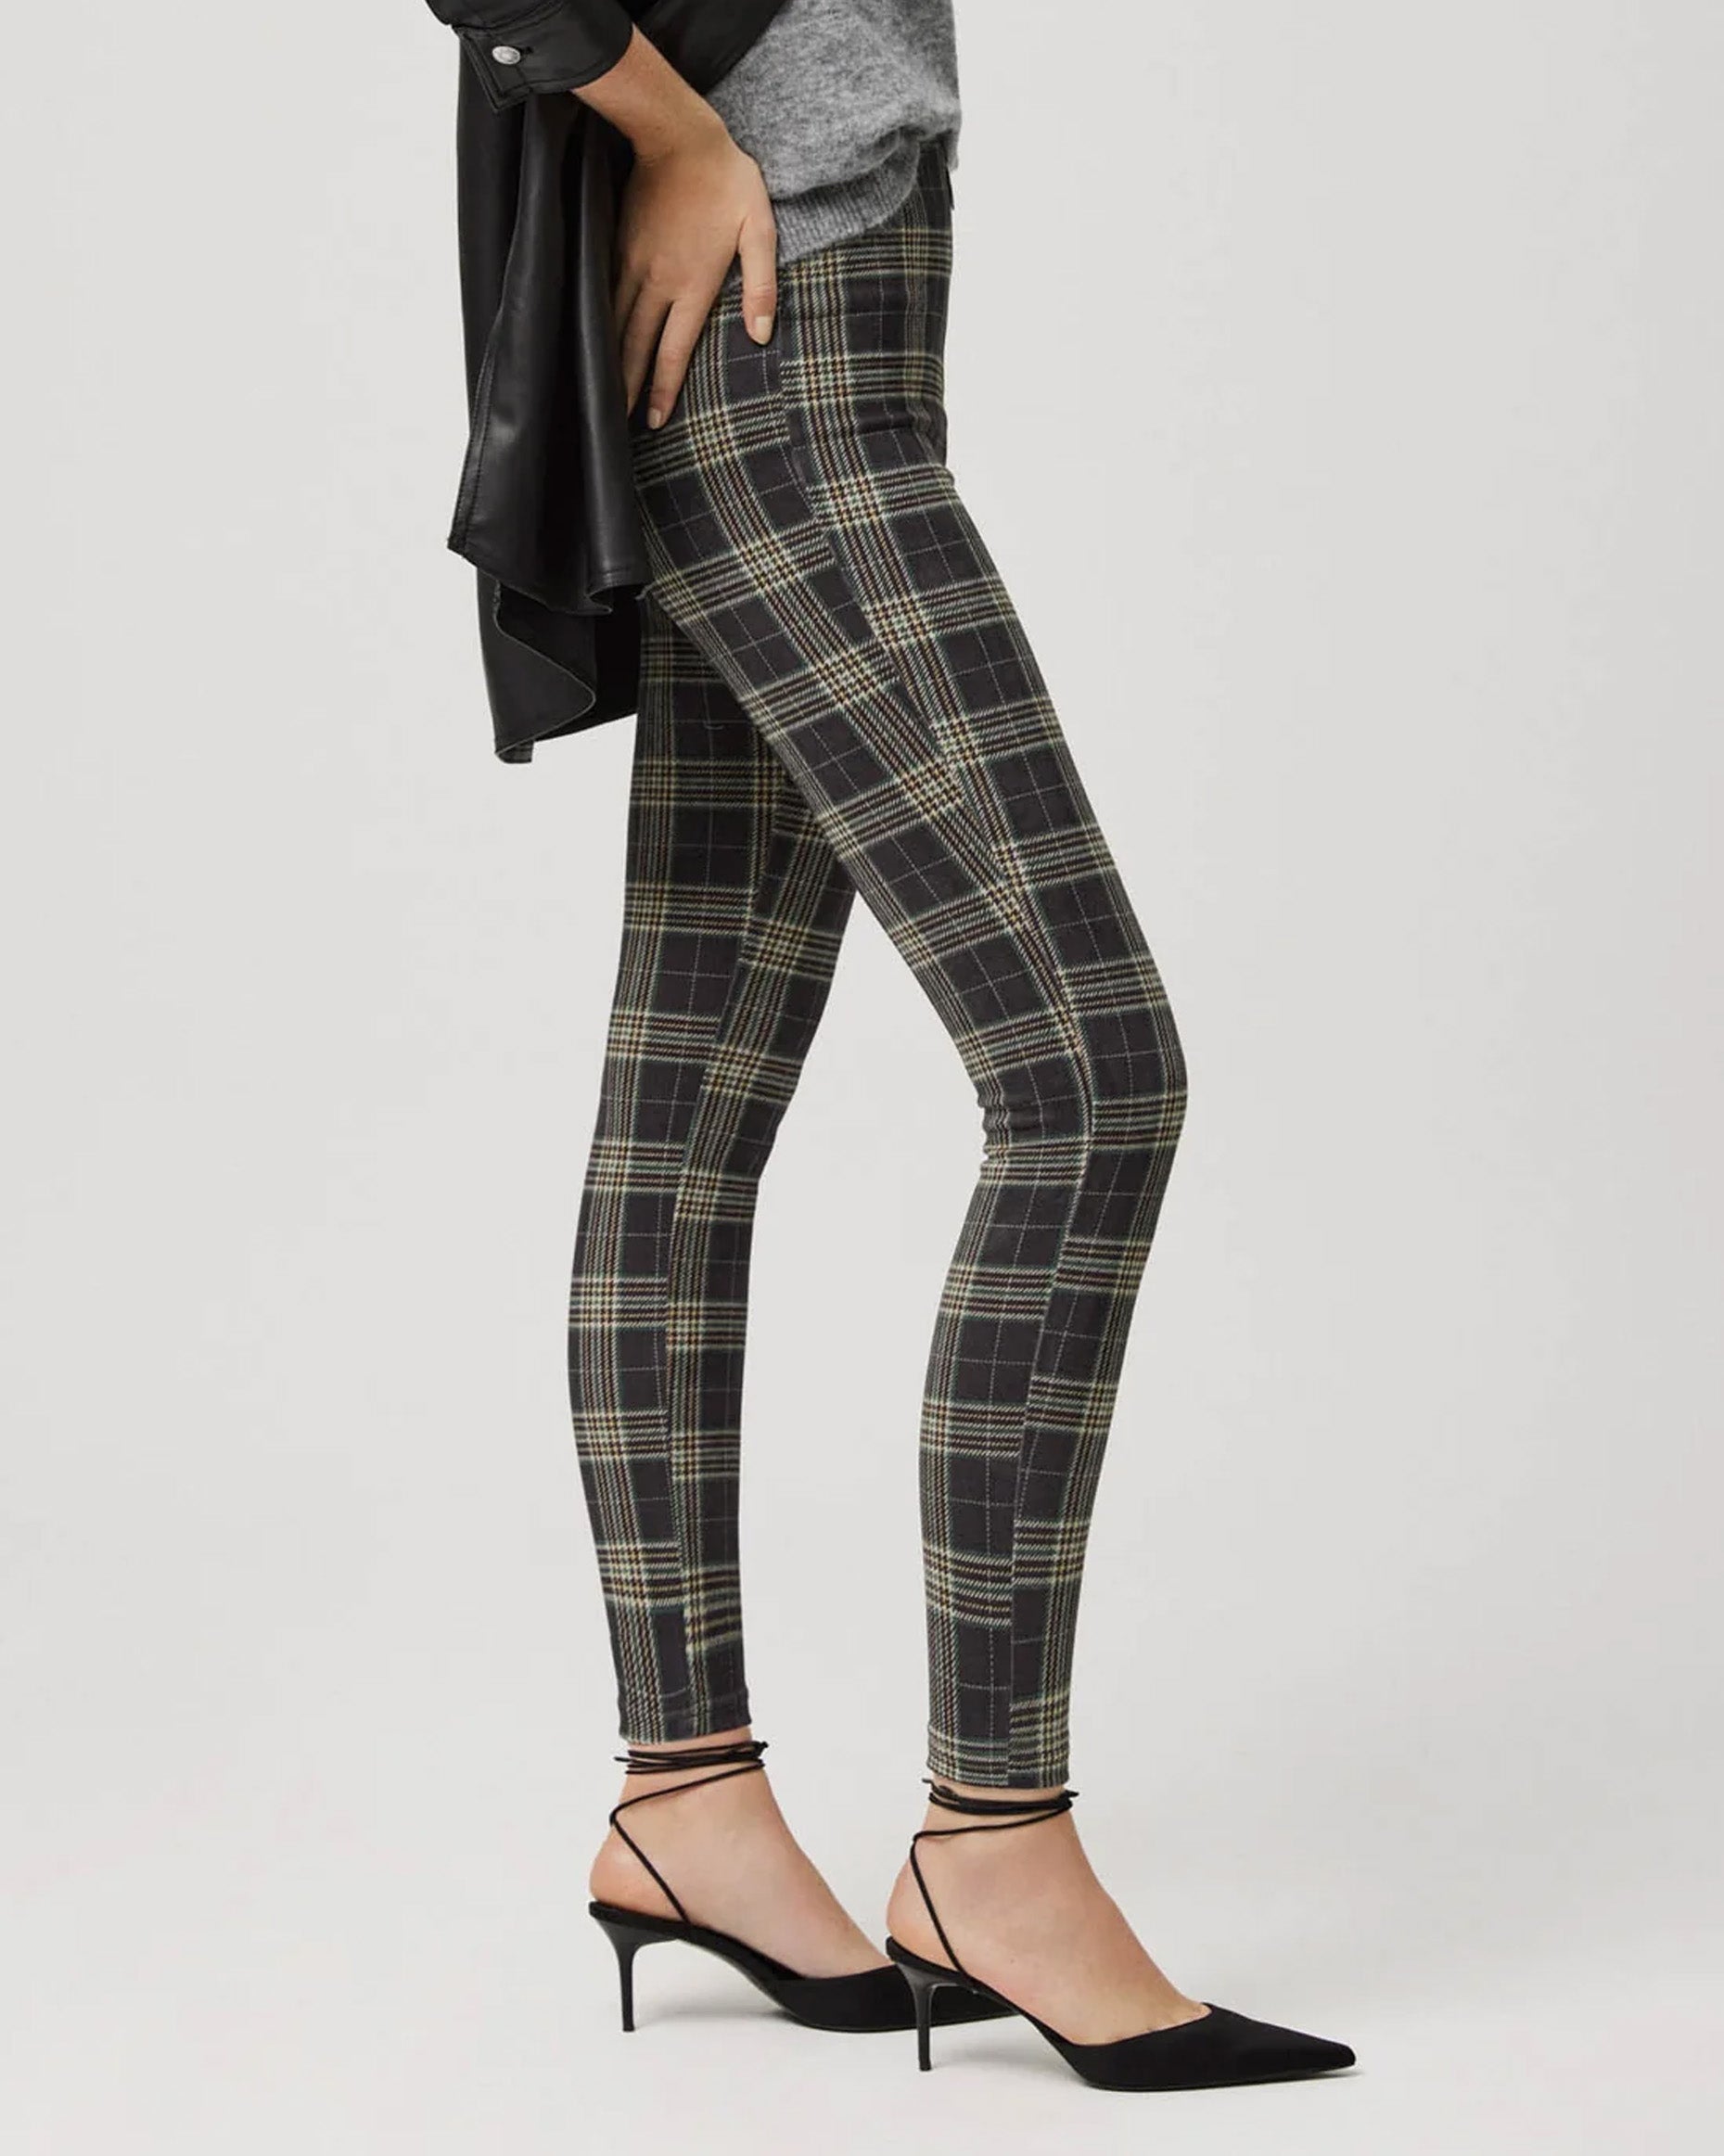 Ysabel Mora 70156 Checked Treggings - Soft plush dark green high waisted stretch trouser leggings (treggings) with a tartan check style pattern in beige, green, cream with a front zip closure and ring pull. Side view.